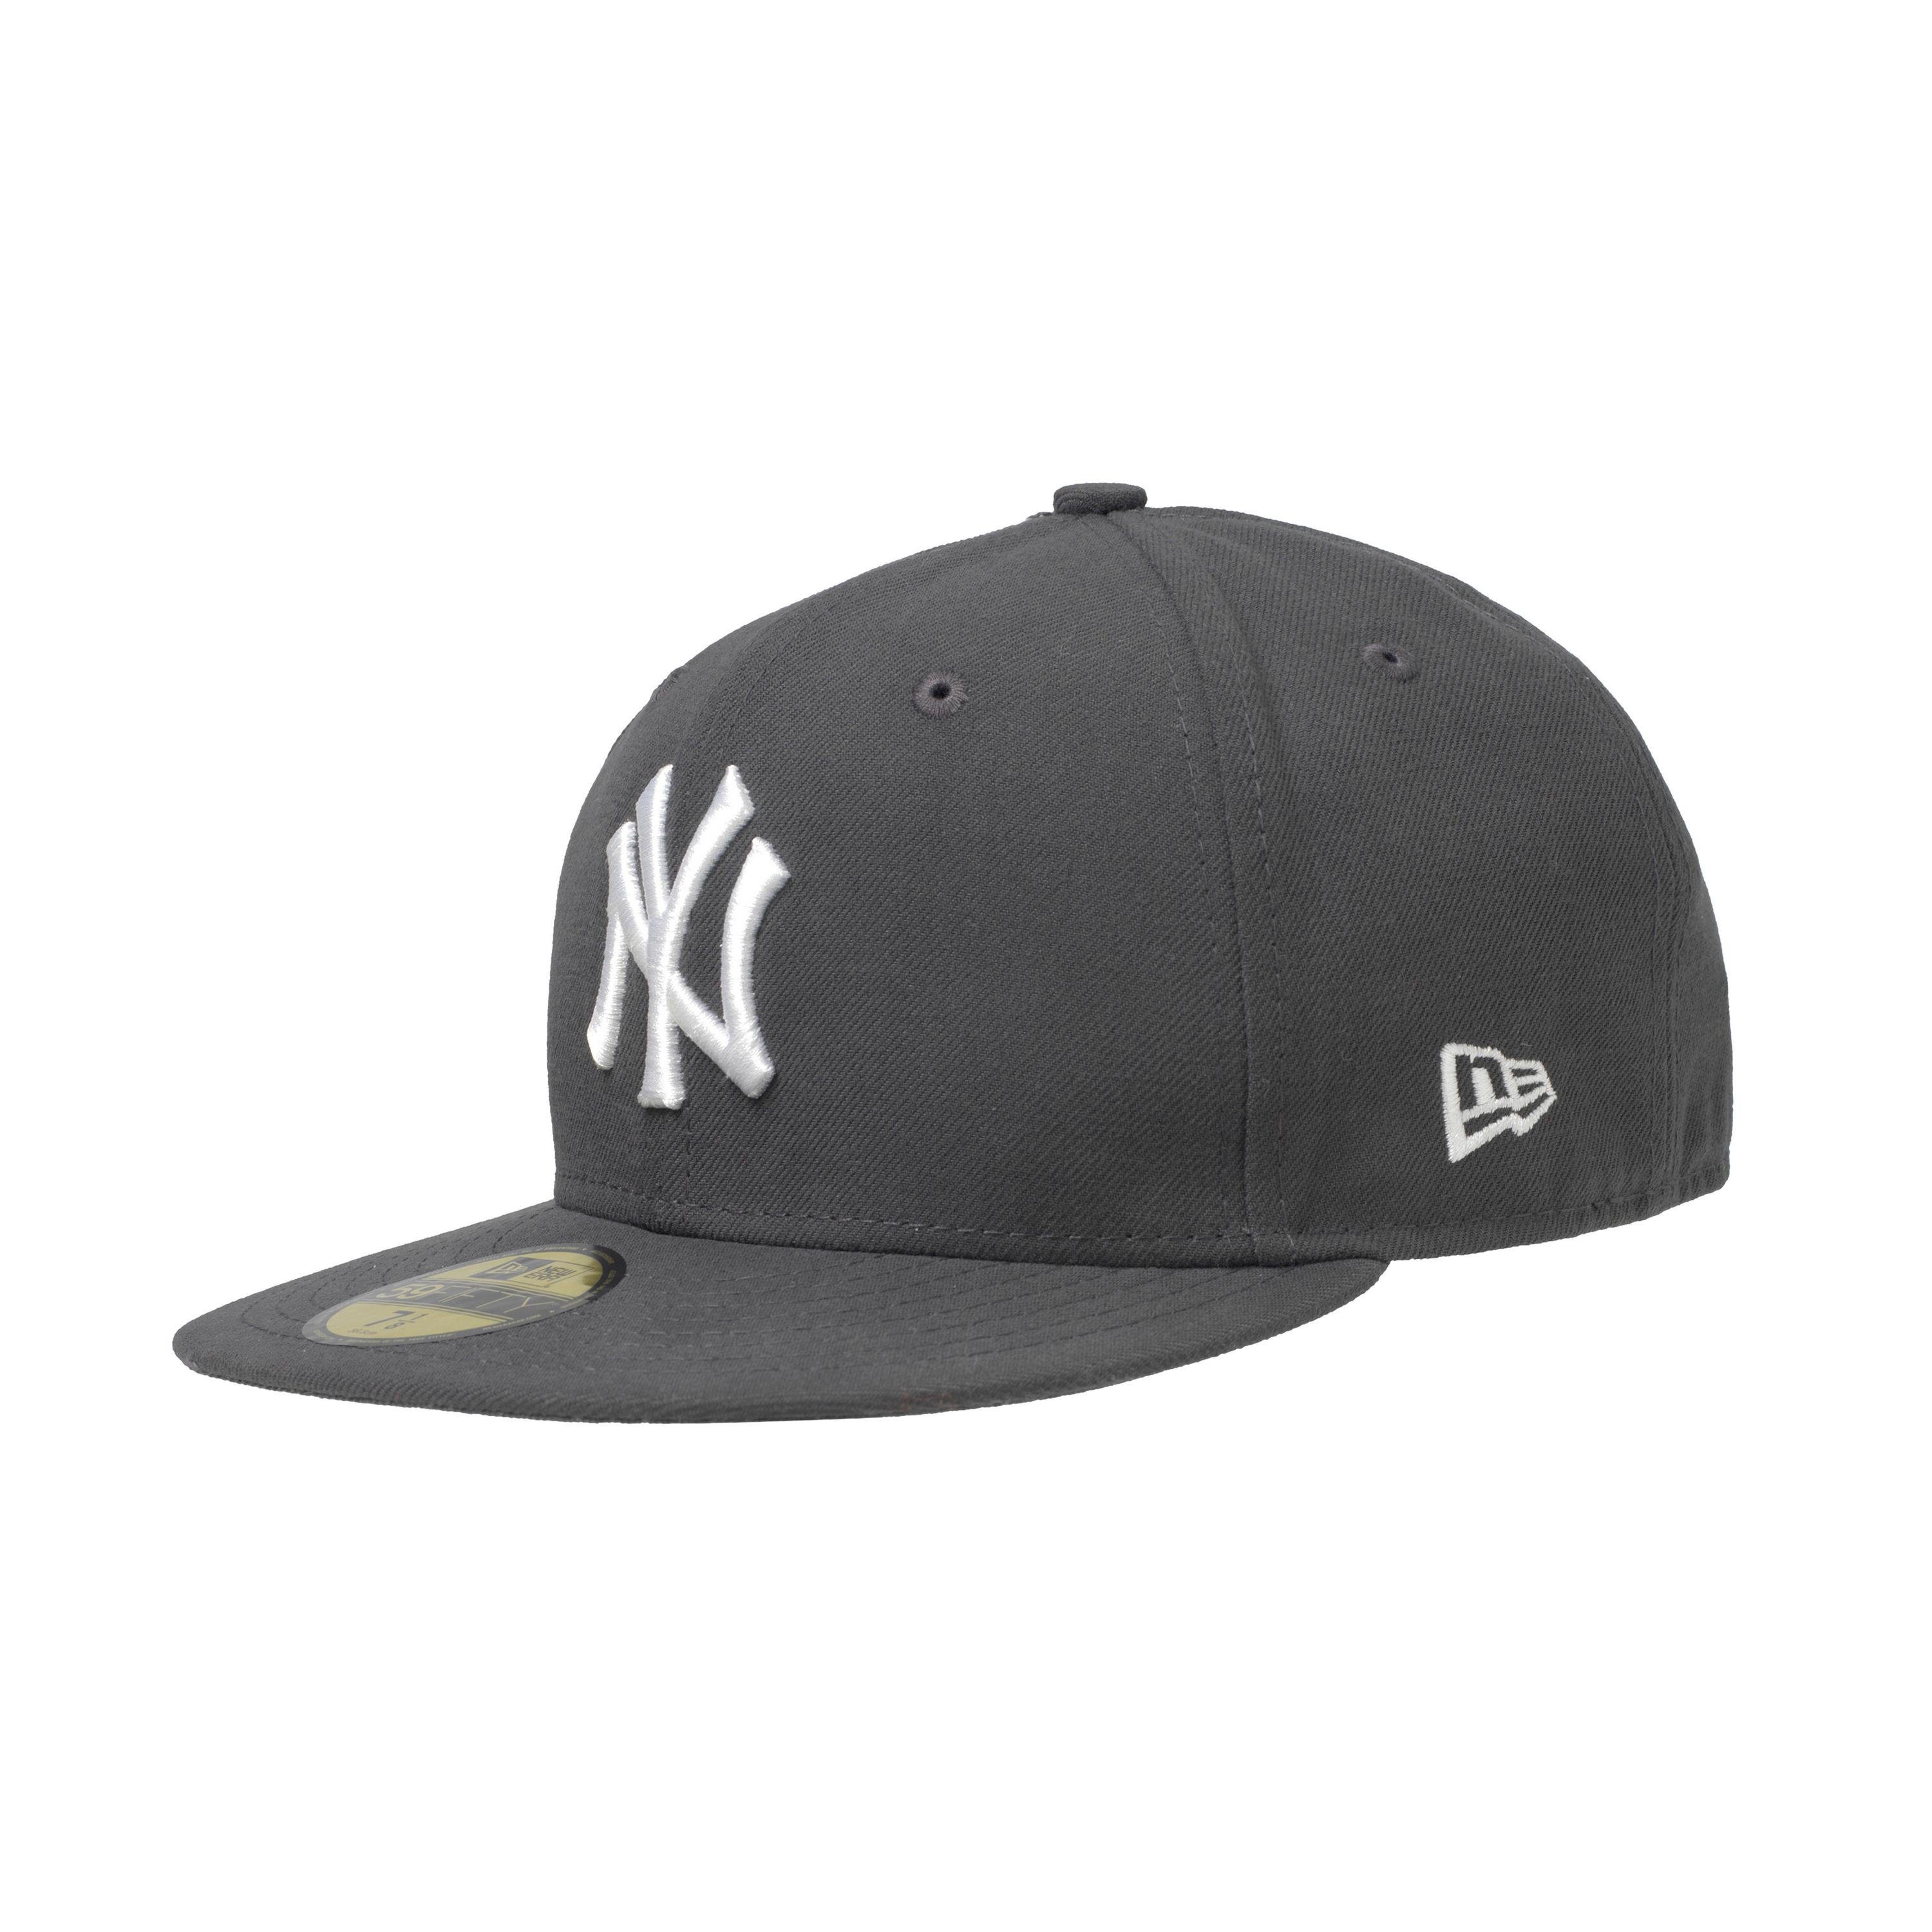 York 59Fifty Fitted Yankees Cap New Era charcoal New